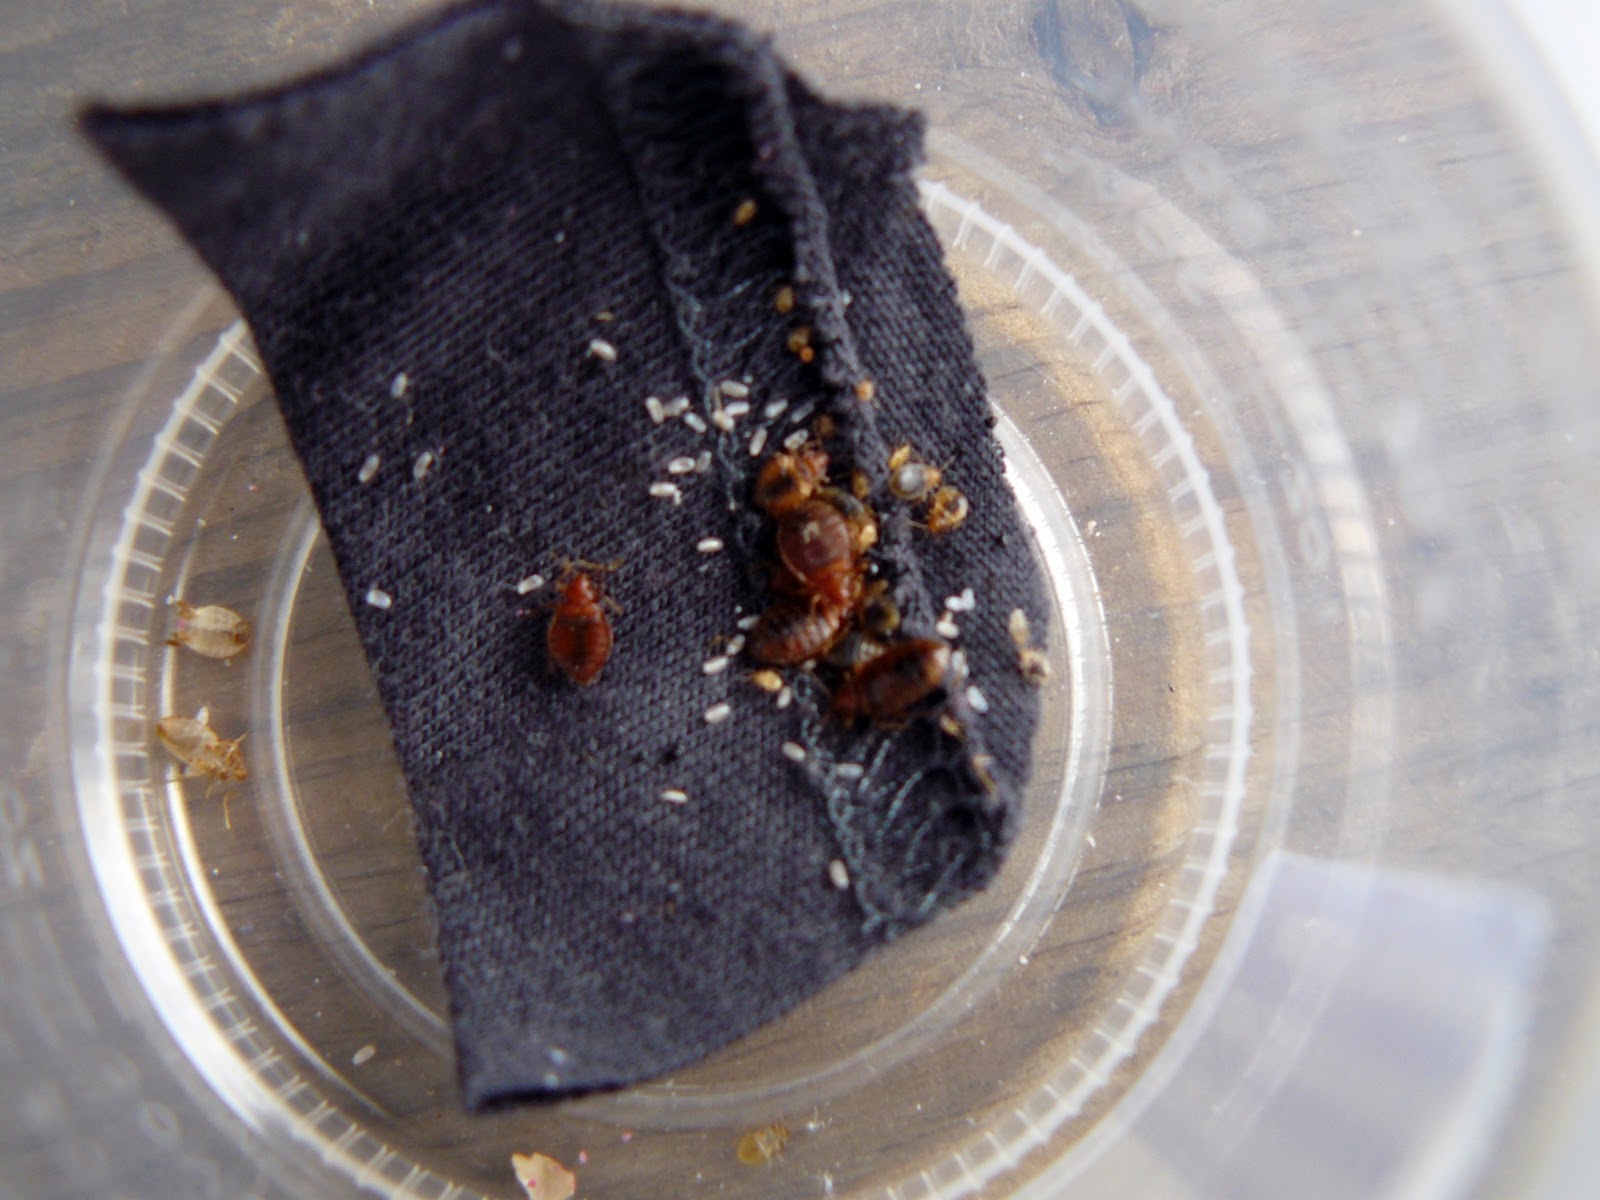 Bed Bug Eggs On Clothing Pictured above is the bedbug